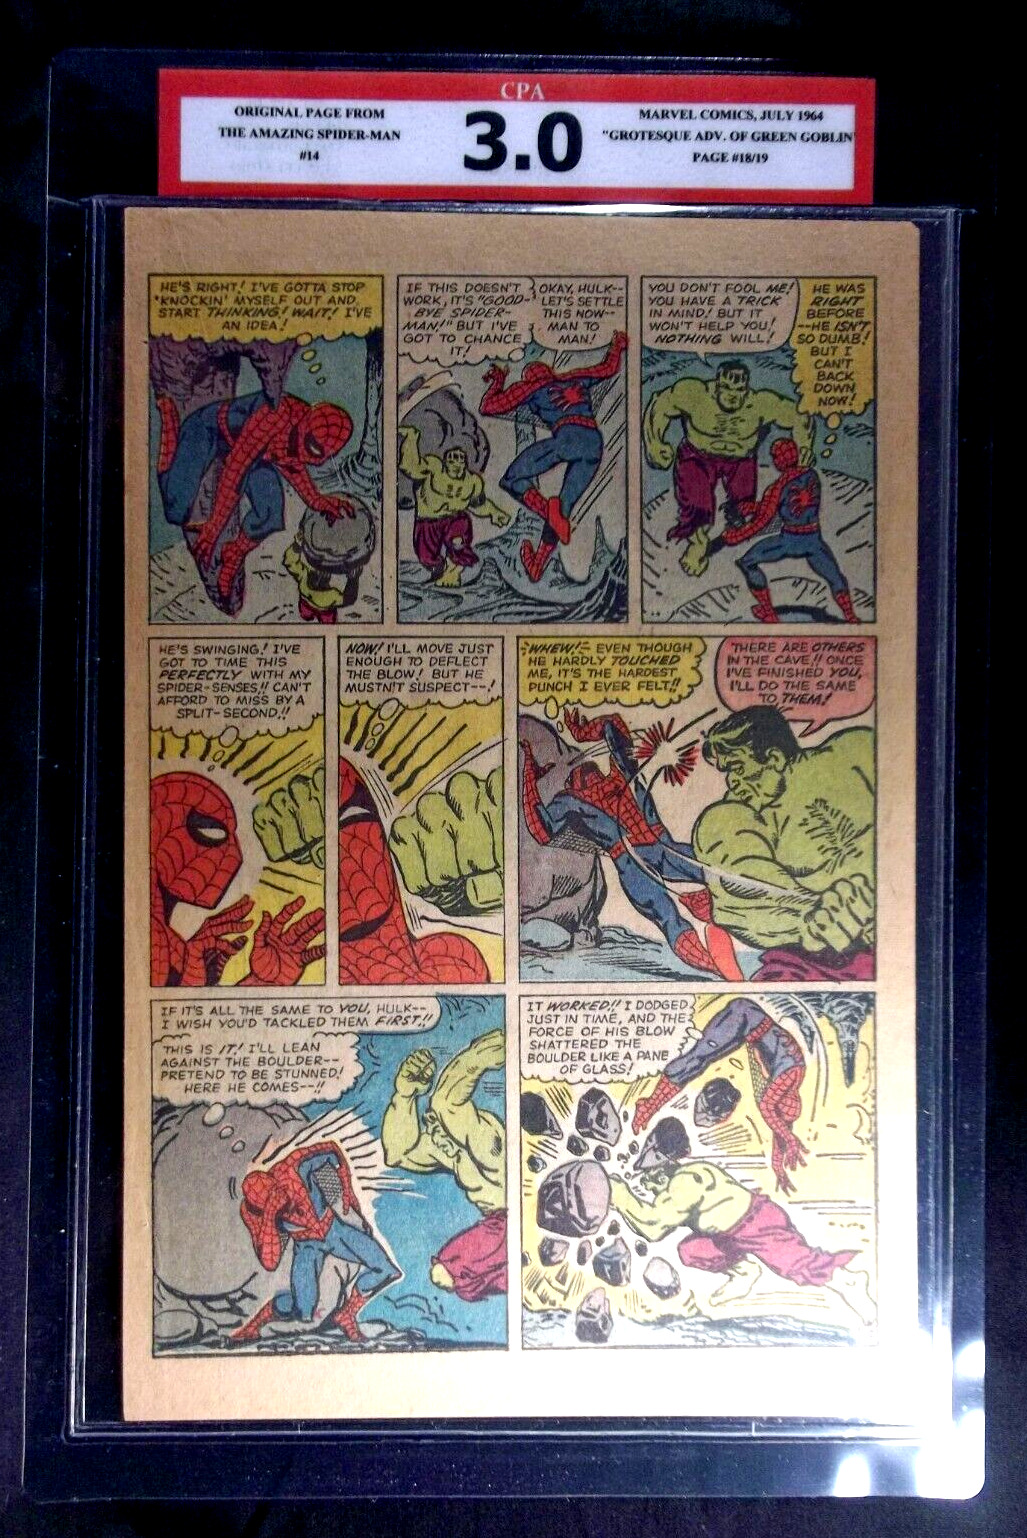 Amazing Spider-man #14 CPA 3.0 SINGLE PAGE #18/19 1st app. The Green Goblin